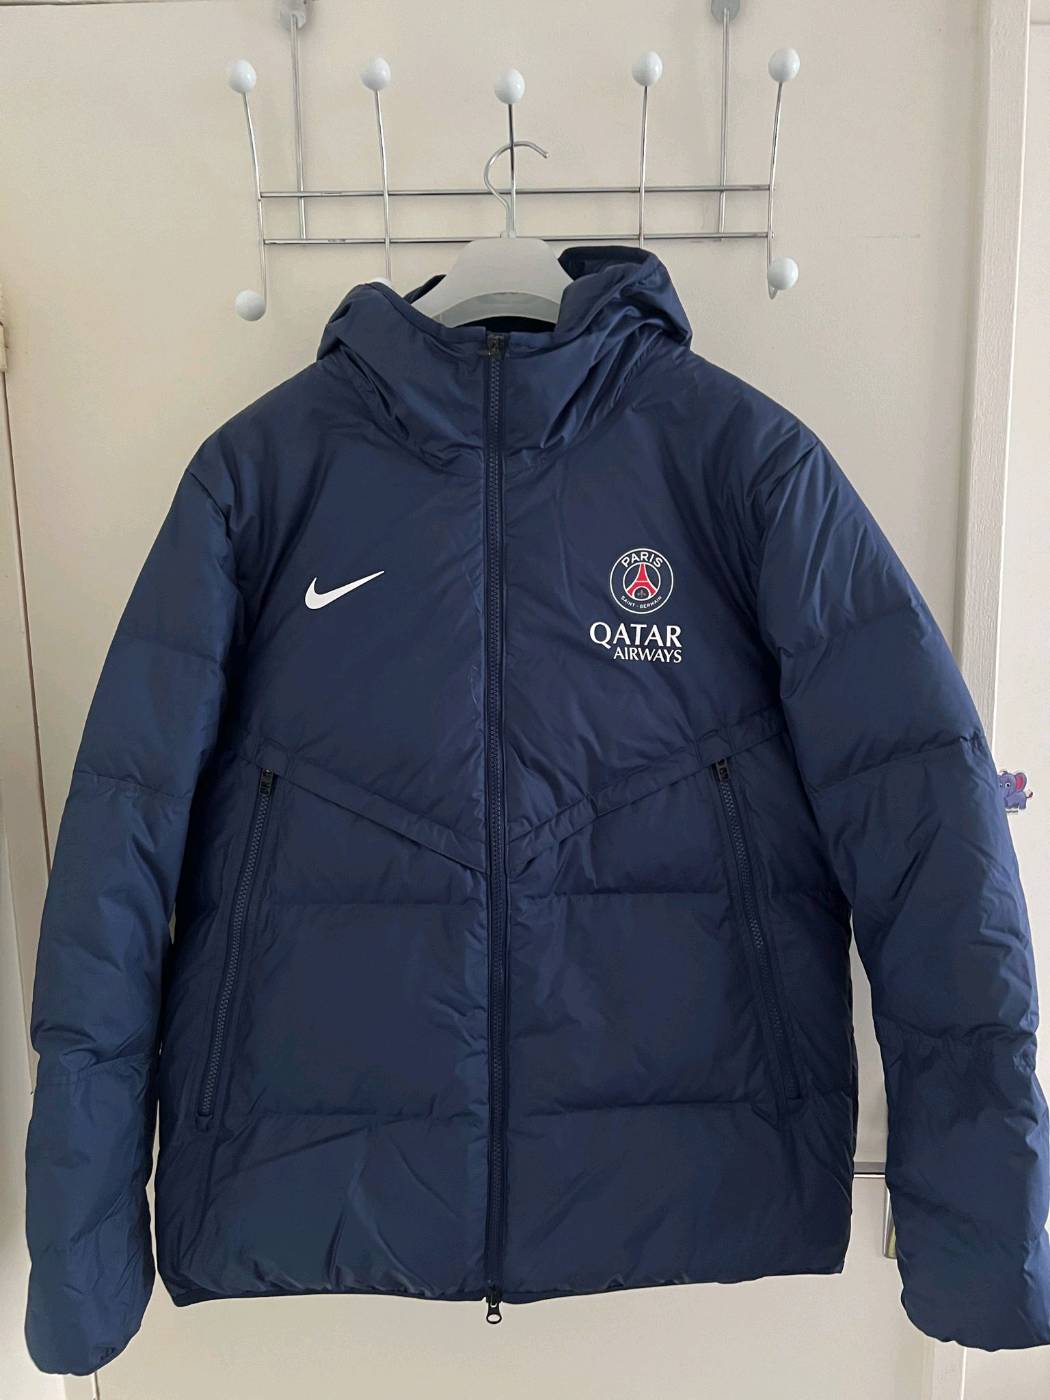 PSG Players' Down Jacket Size L - Authentic with Qatar Airways Logo